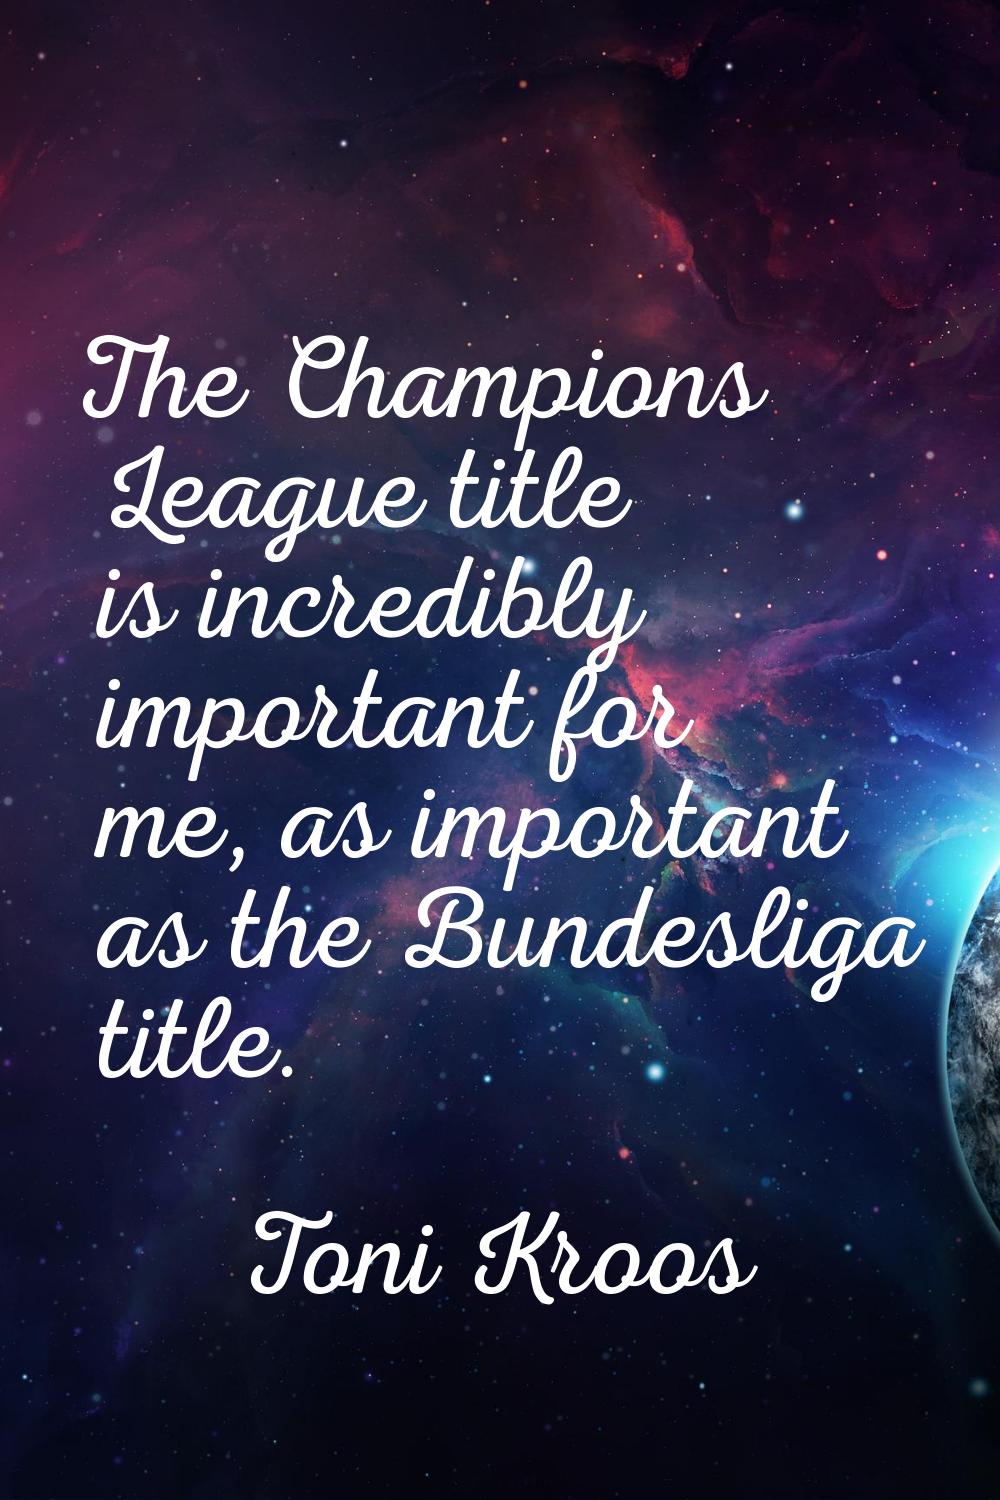 The Champions League title is incredibly important for me, as important as the Bundesliga title.